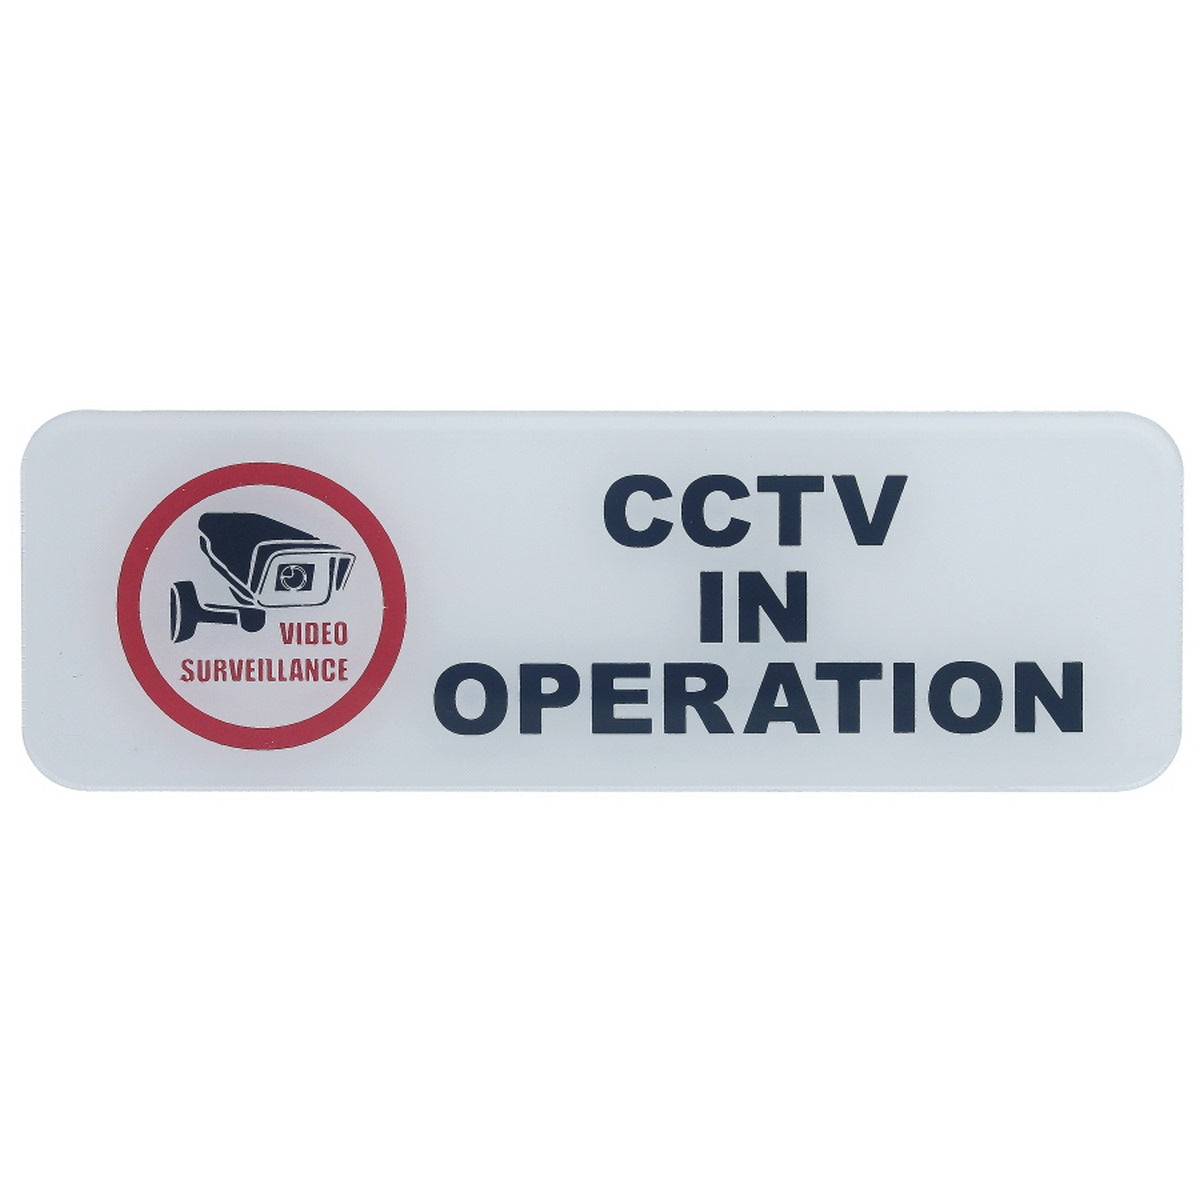 CCTV In Operation White Self Adhesive Sticker - For Shops, Hospitals, Schools, Corporates, Offices JASWCCTV